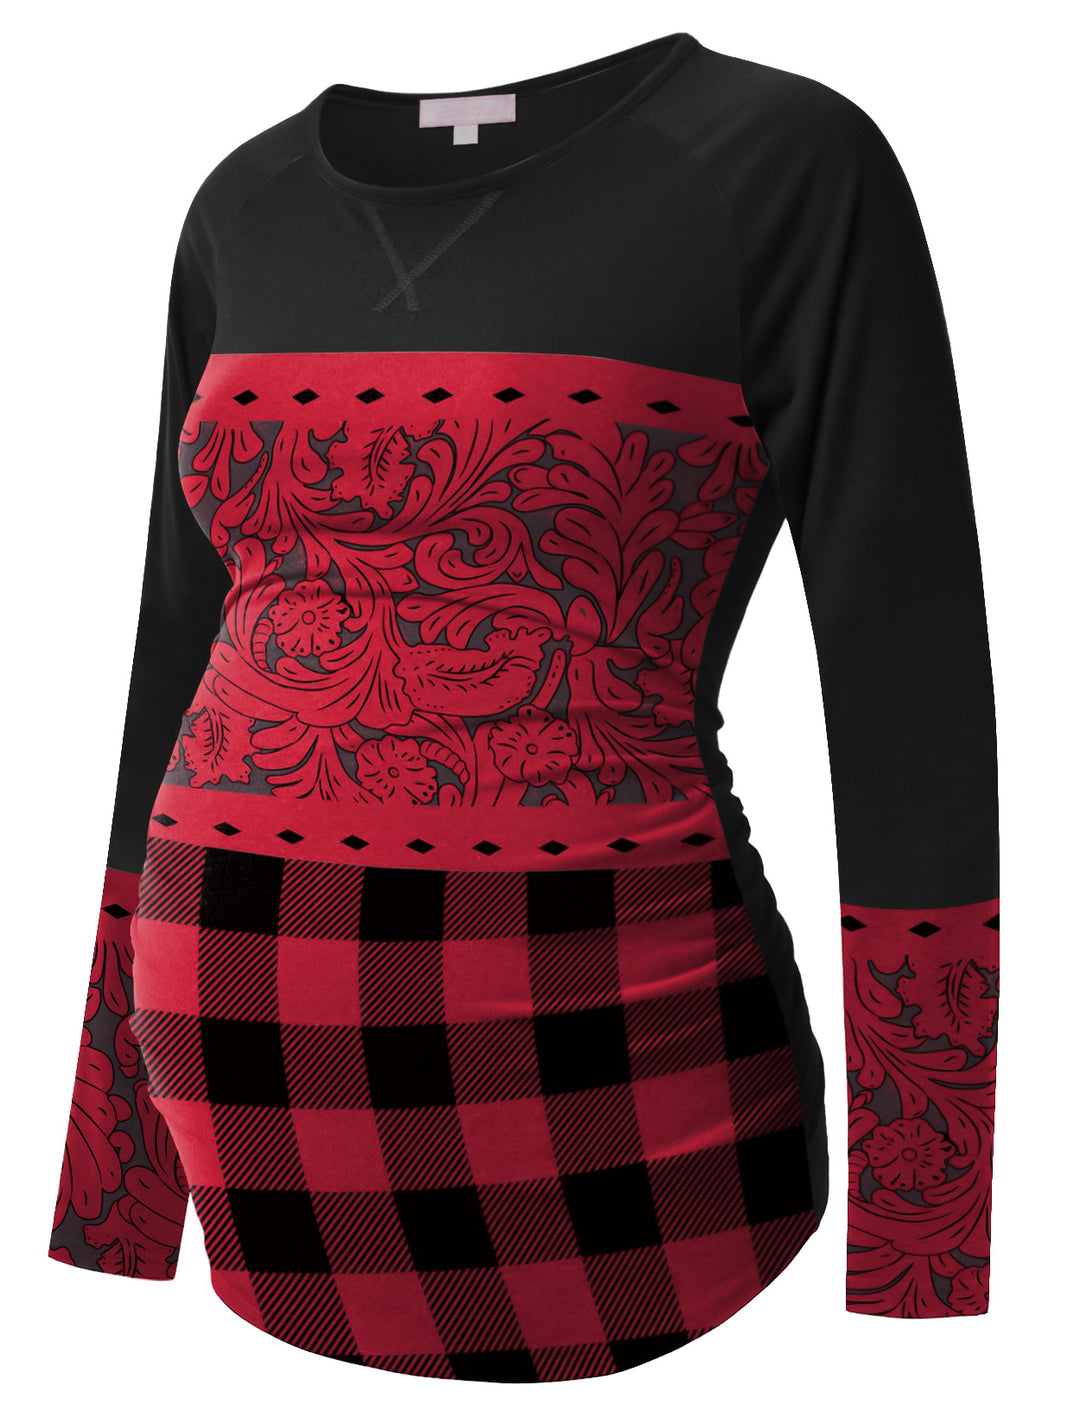 Black and Red Plaid Pattern Printed Long Sleeve Maternity Top